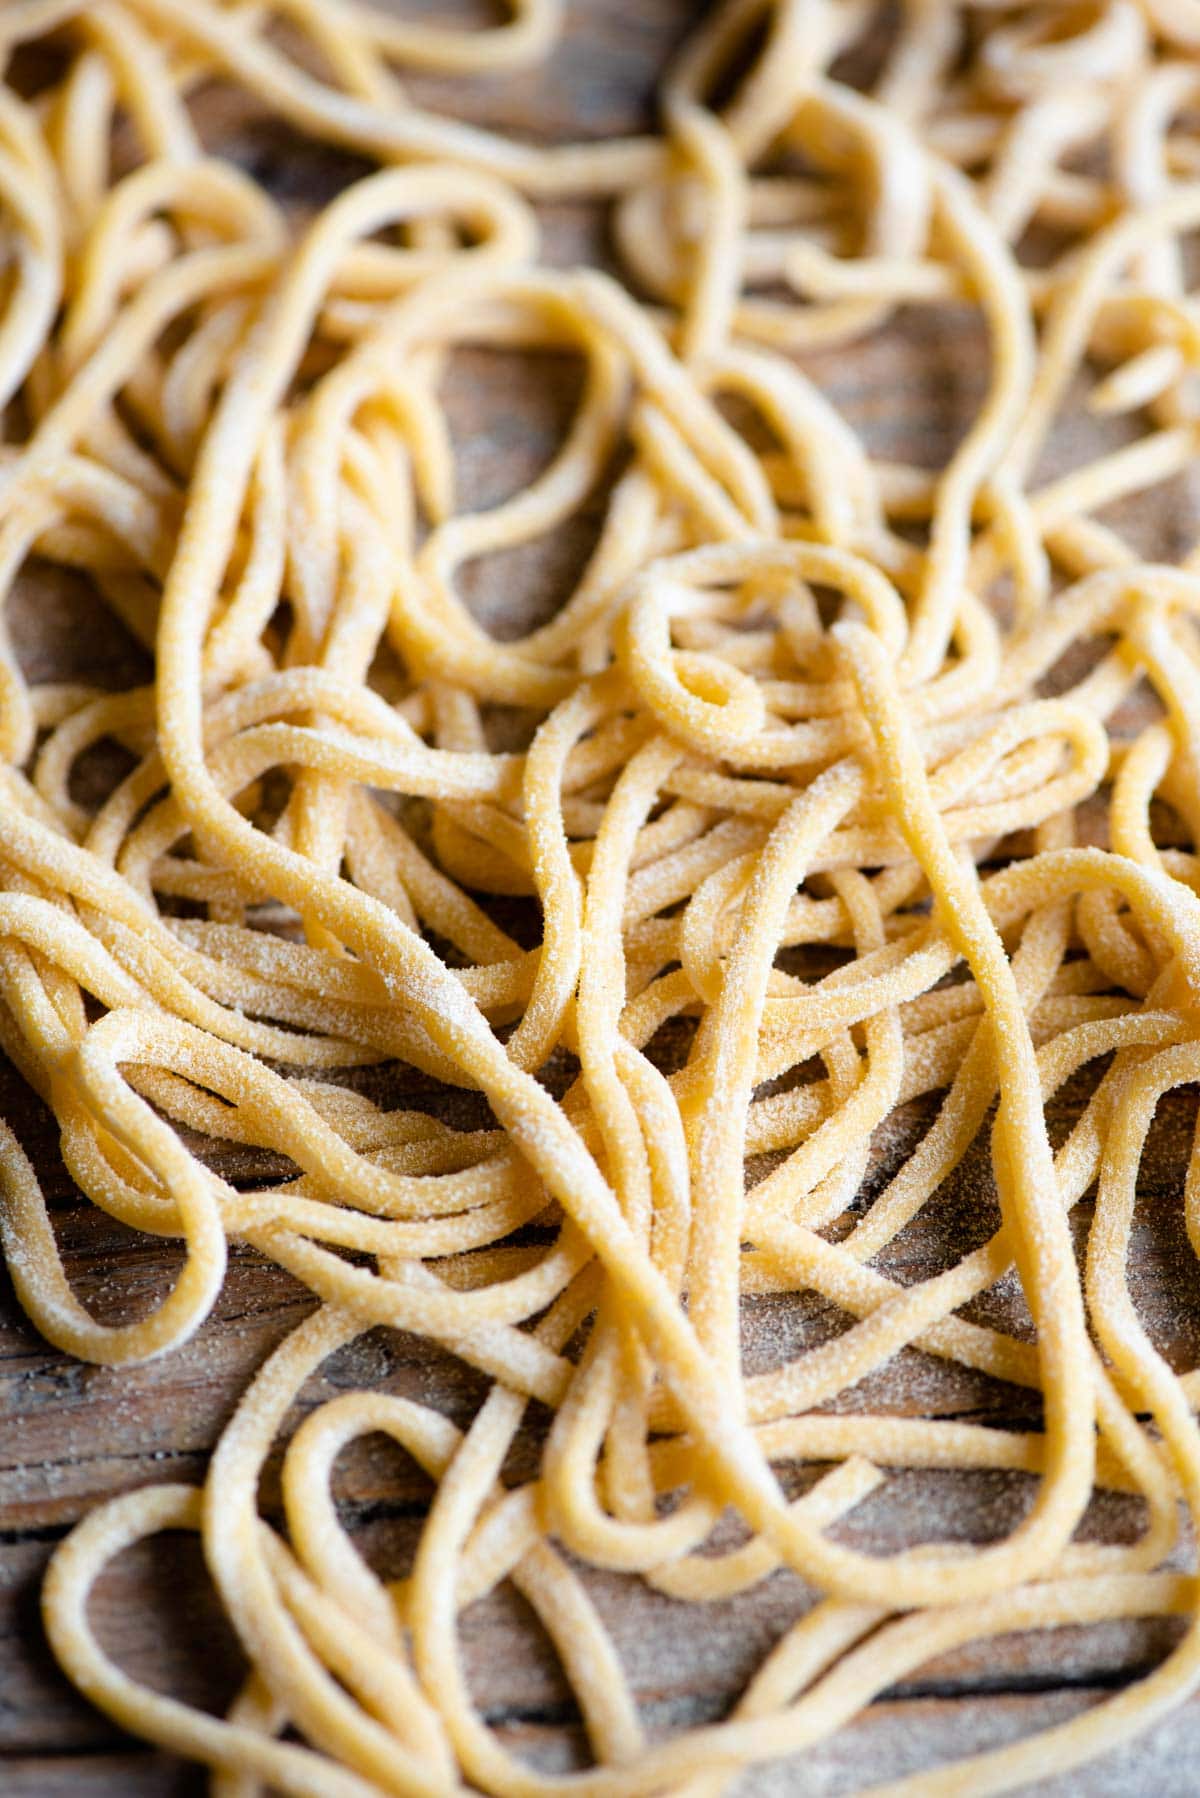 A close up of Tonnarelli pasta aka Spaghetti alla Chitarra scattered on a wooden surface